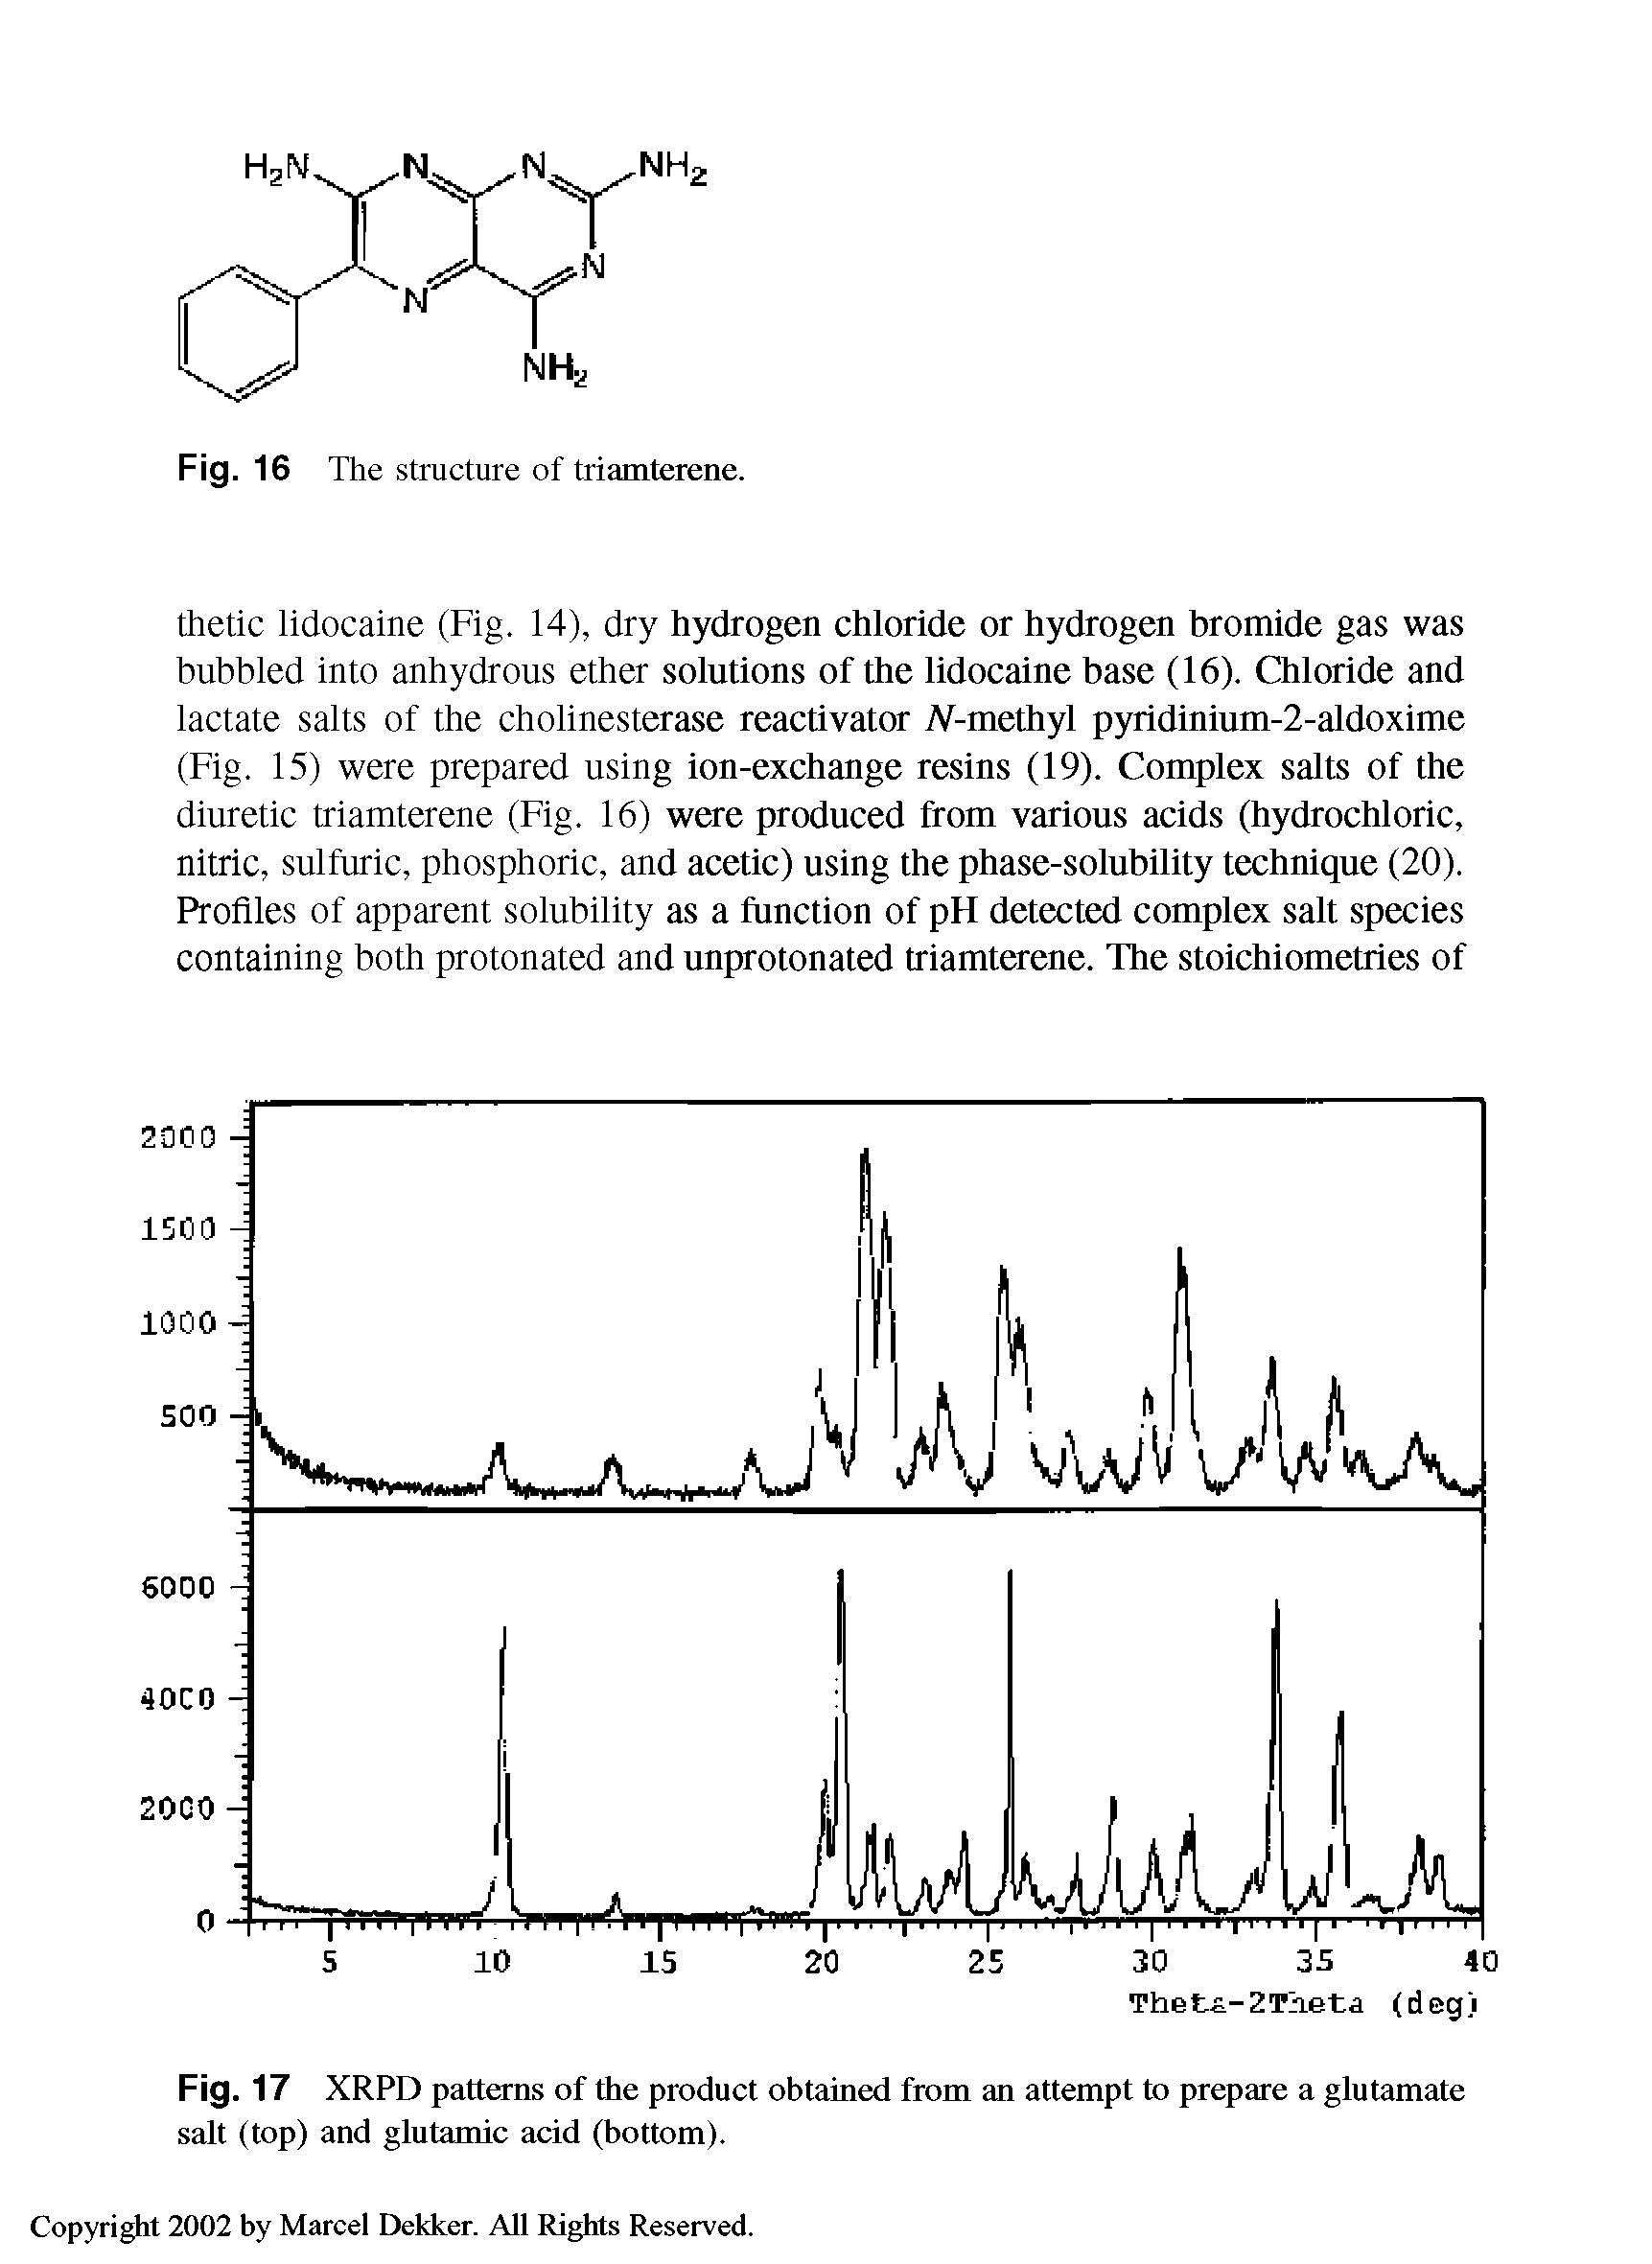 Fig. 17 XRPD patterns of the product obtained from an attempt to prepare a glutamate salt (top) and glutamic acid (bottom).